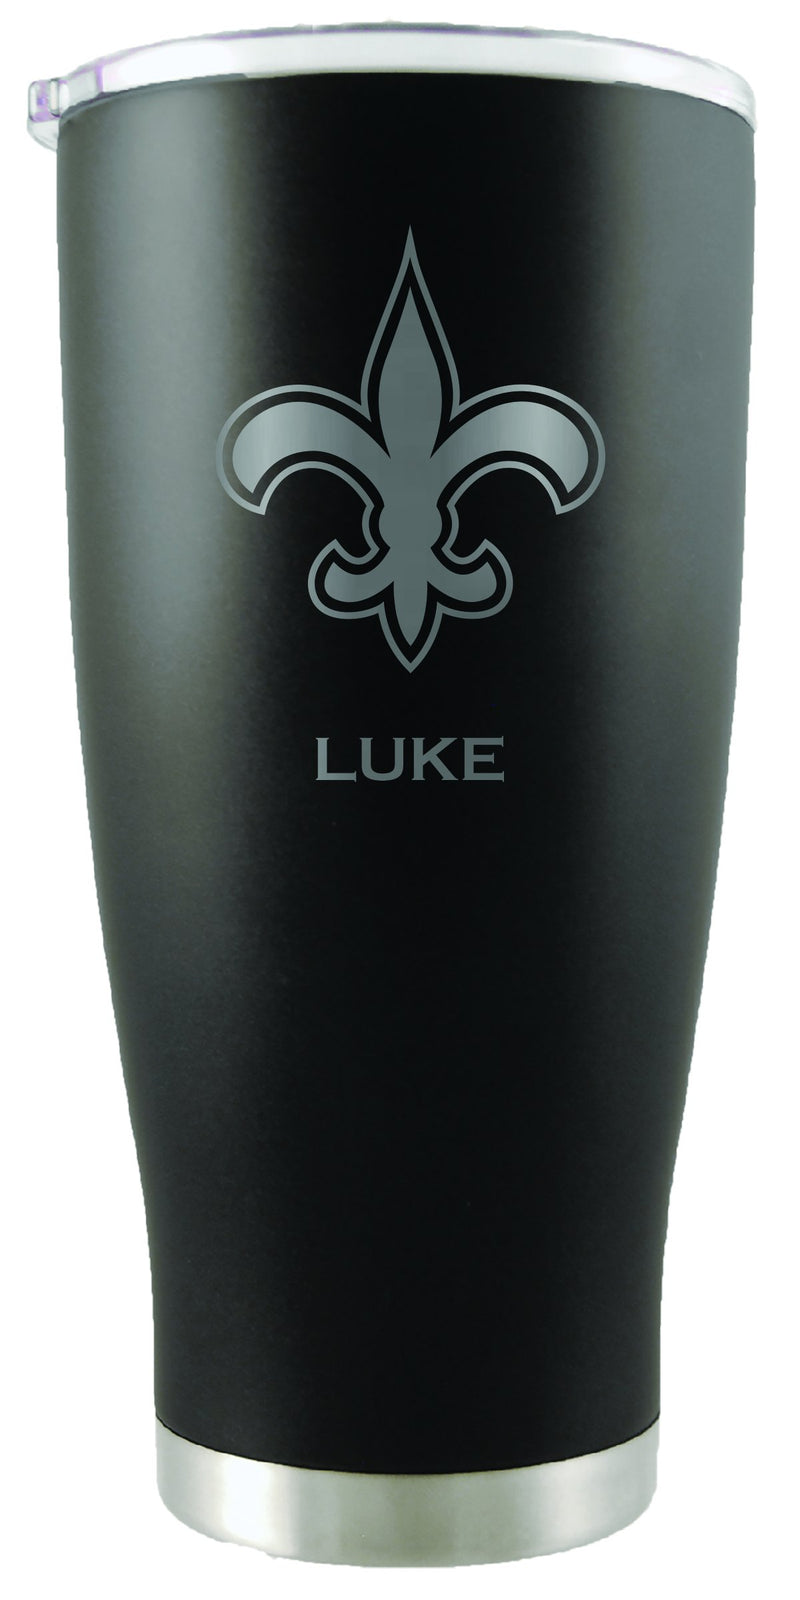 20oz Black Personalized Stainless Steel Tumbler | New Orleans Saints
CurrentProduct, Drinkware_category_All, New Orleans Saints, NFL, NOS, Personalized_Personalized, Stainless Steel
The Memory Company